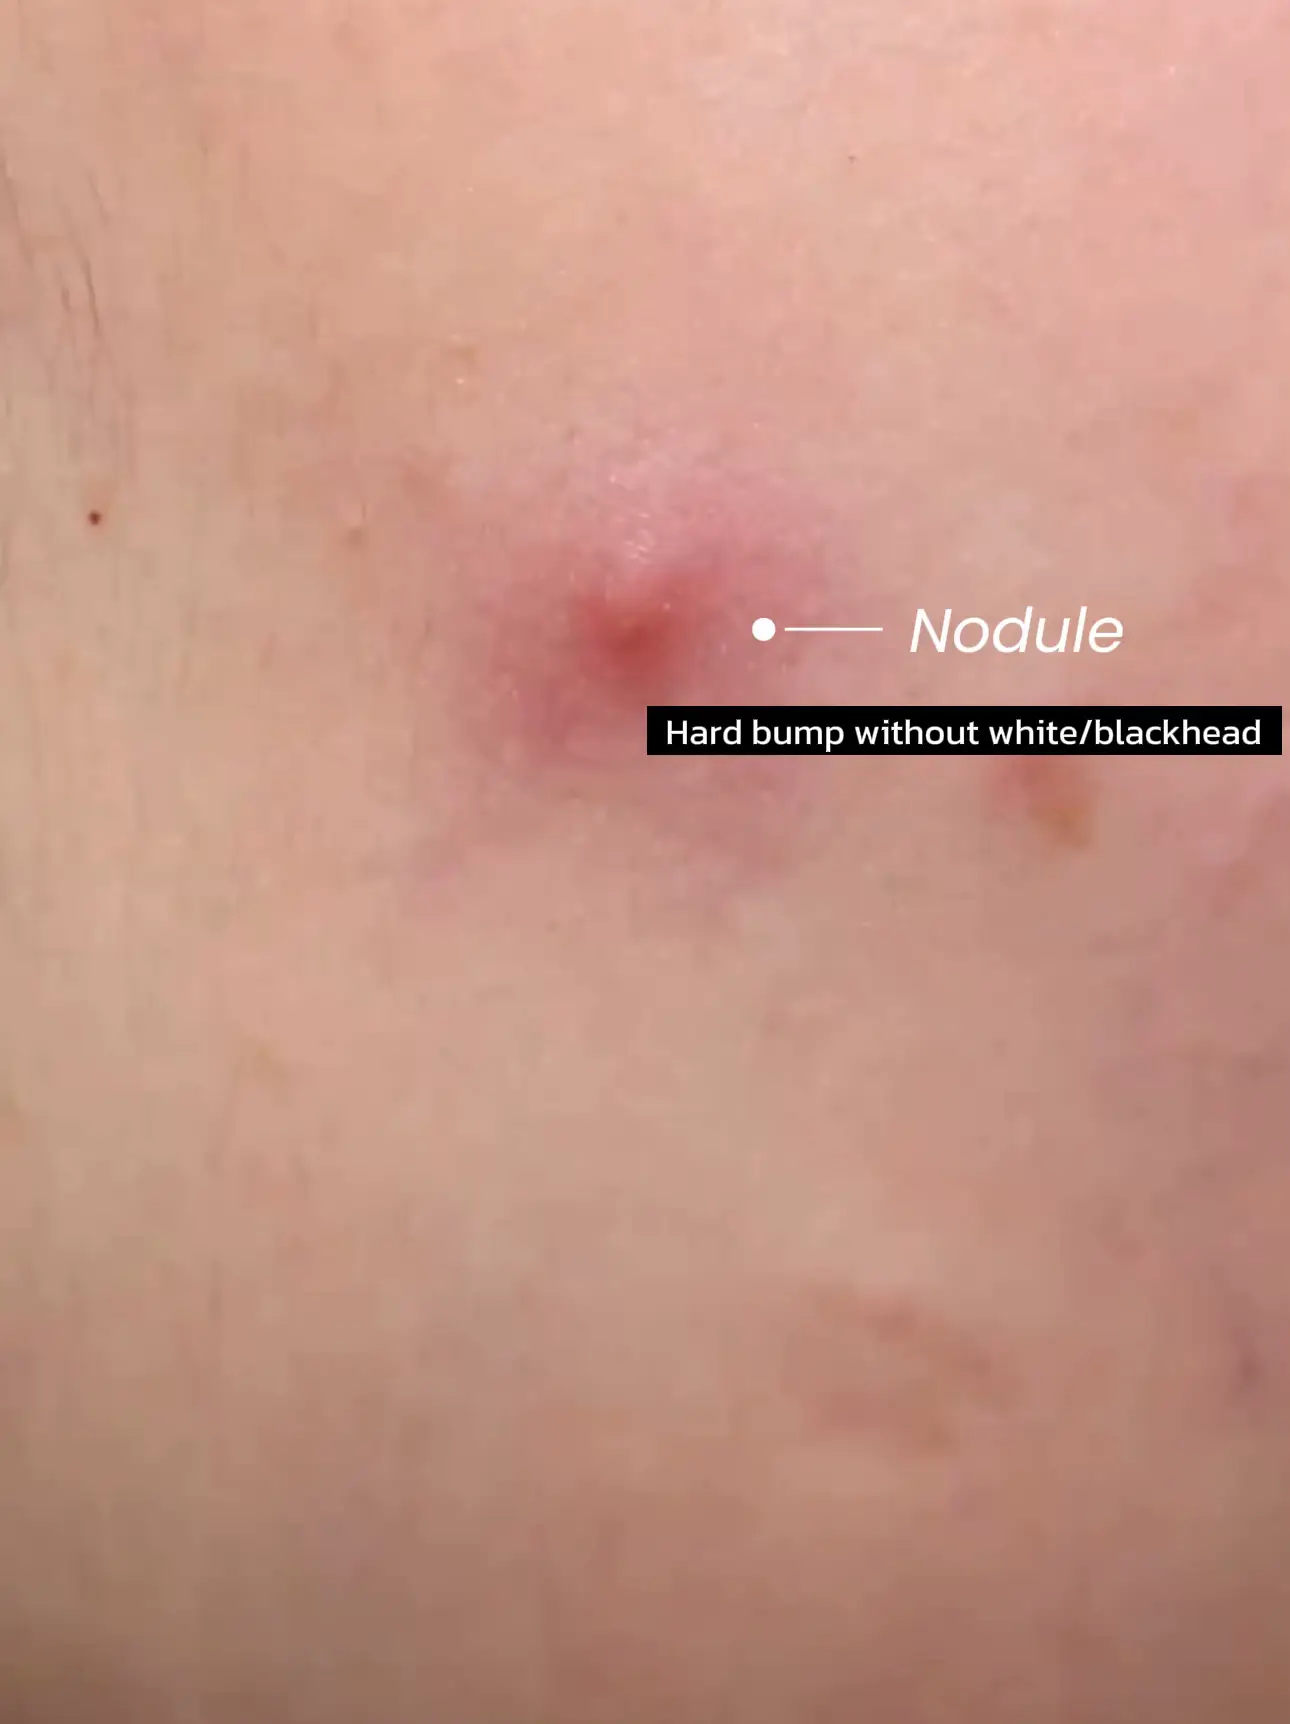 Identifying acne that can be extracted's images(2)